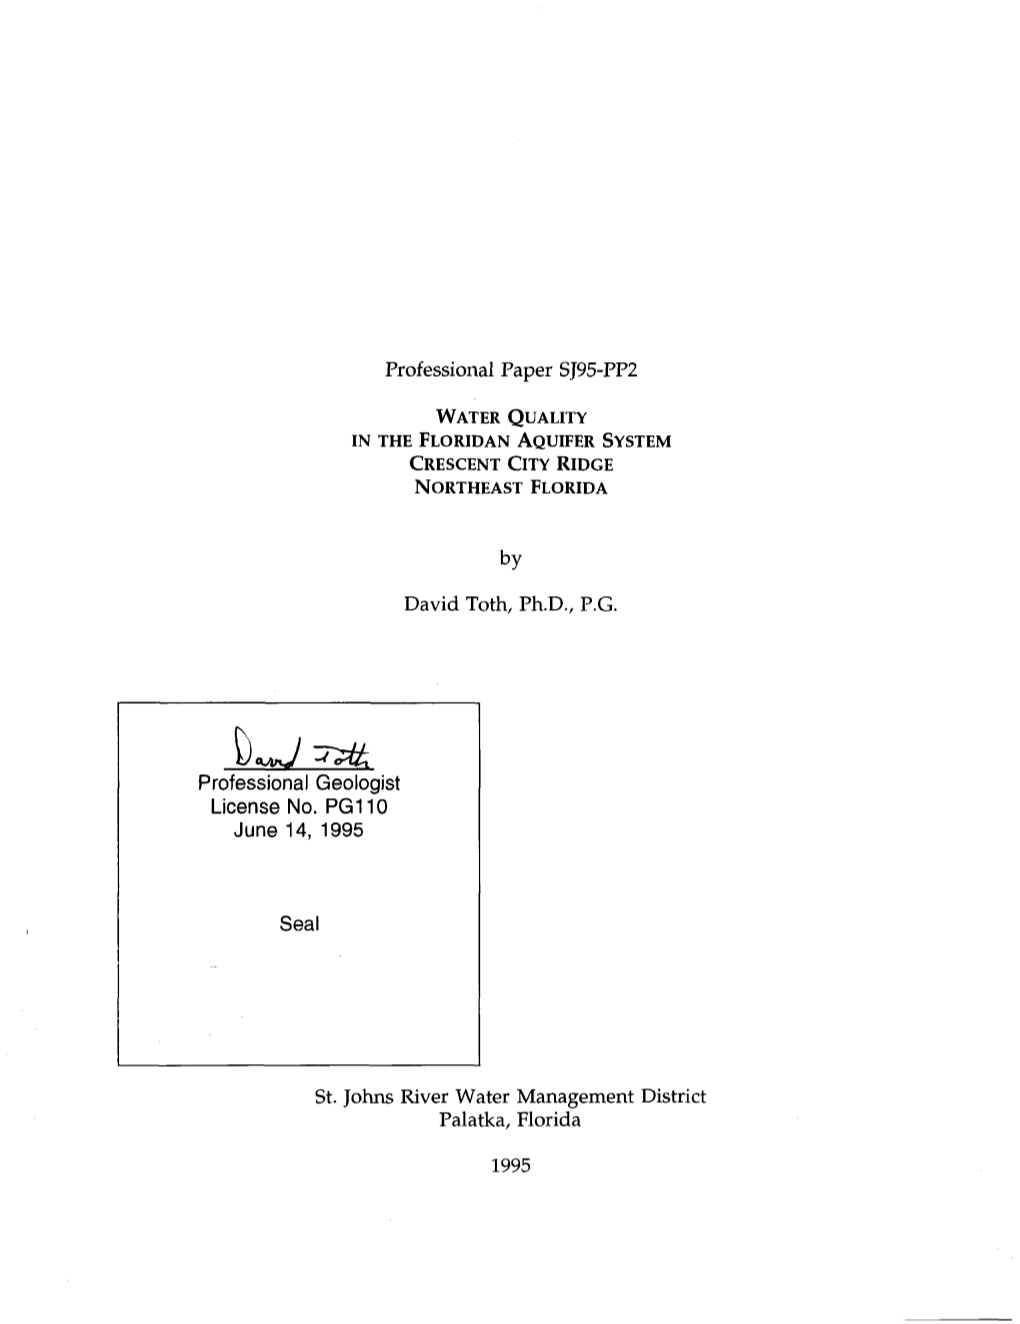 Professional Paper SJ95-PP2 WATER QUALITY in the FLORIDAN